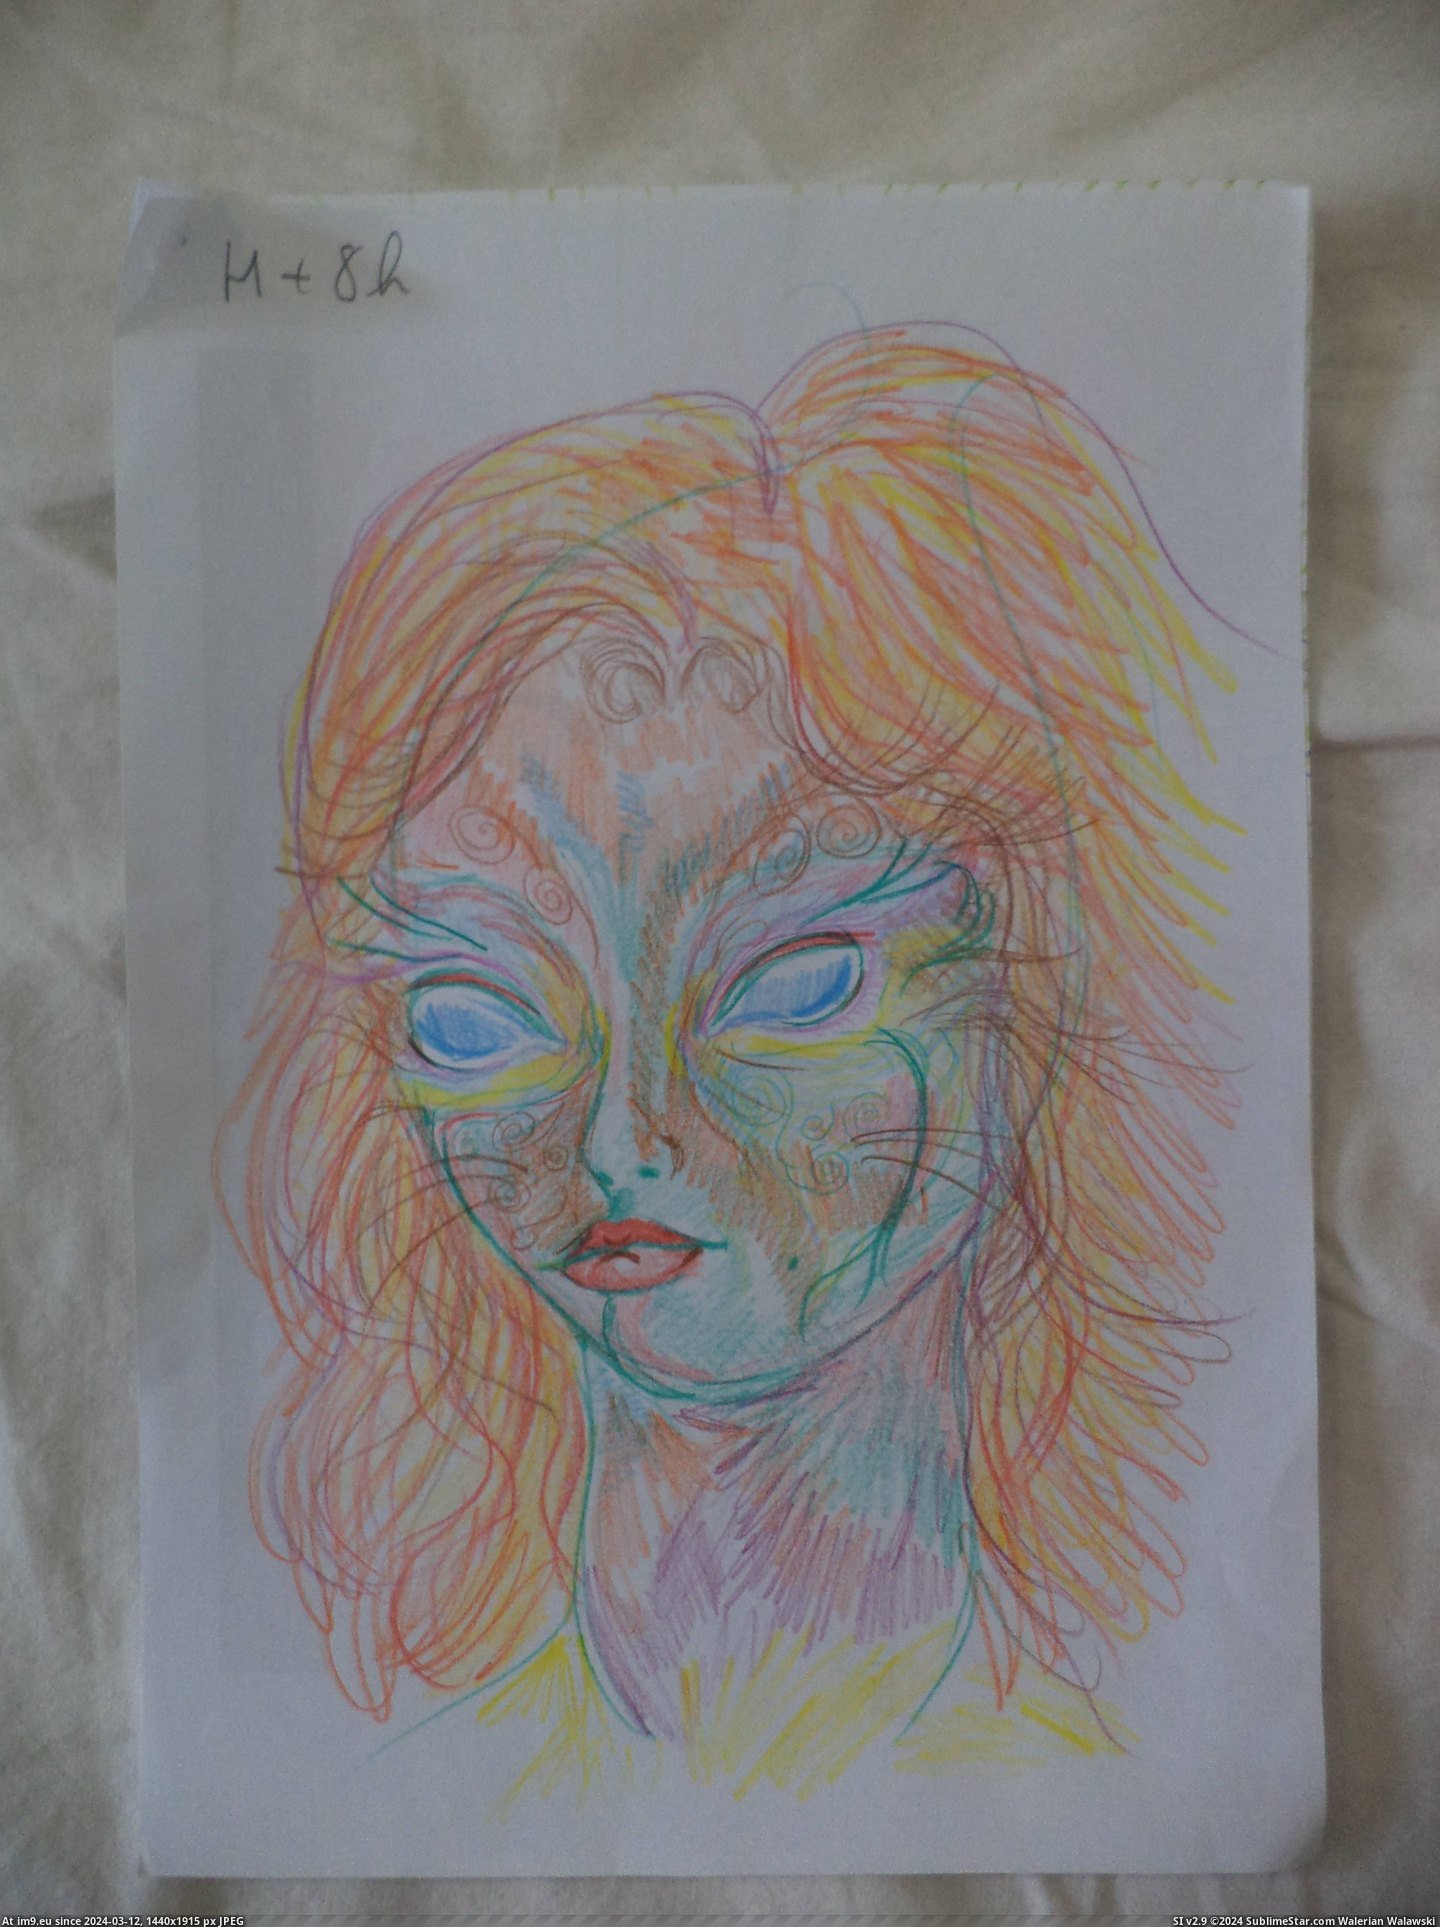 #Time #Friend #Portraits #Lsd #Trip #Drew [Pics] What a LSD trip looks like: a friend of mine drew 11 self-portraits during her first time. 7 Pic. (Изображение из альбом My r/PICS favs))